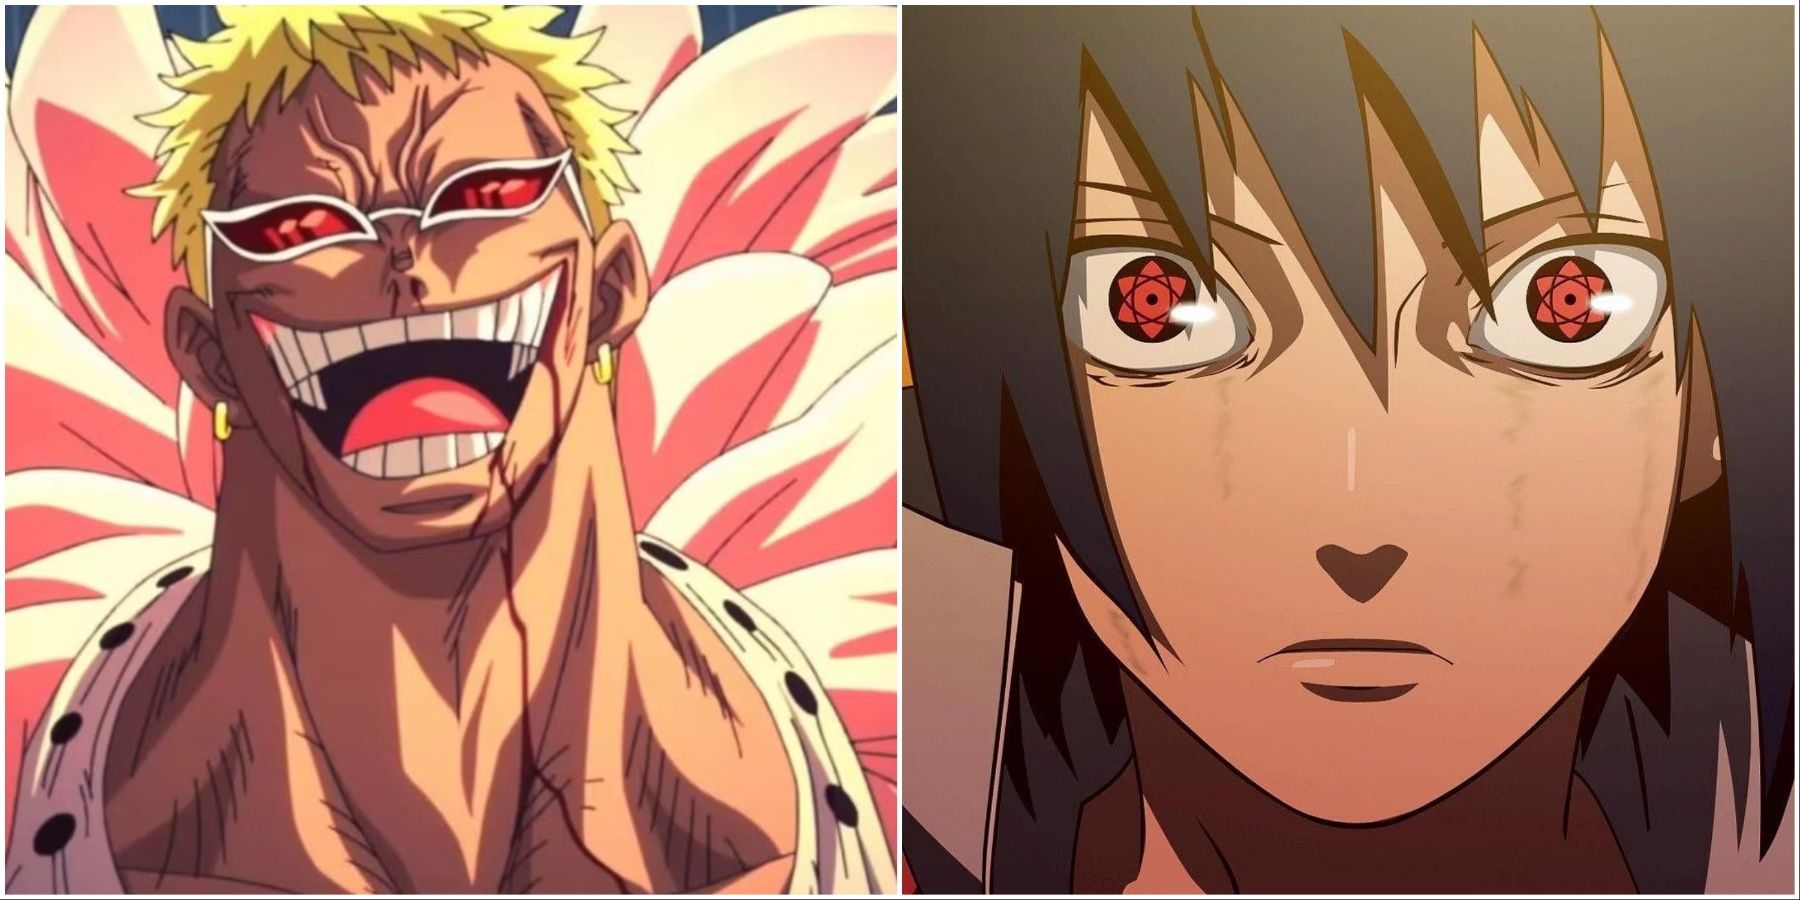 The Portrayal of Villains In Naruto Versus One Piece